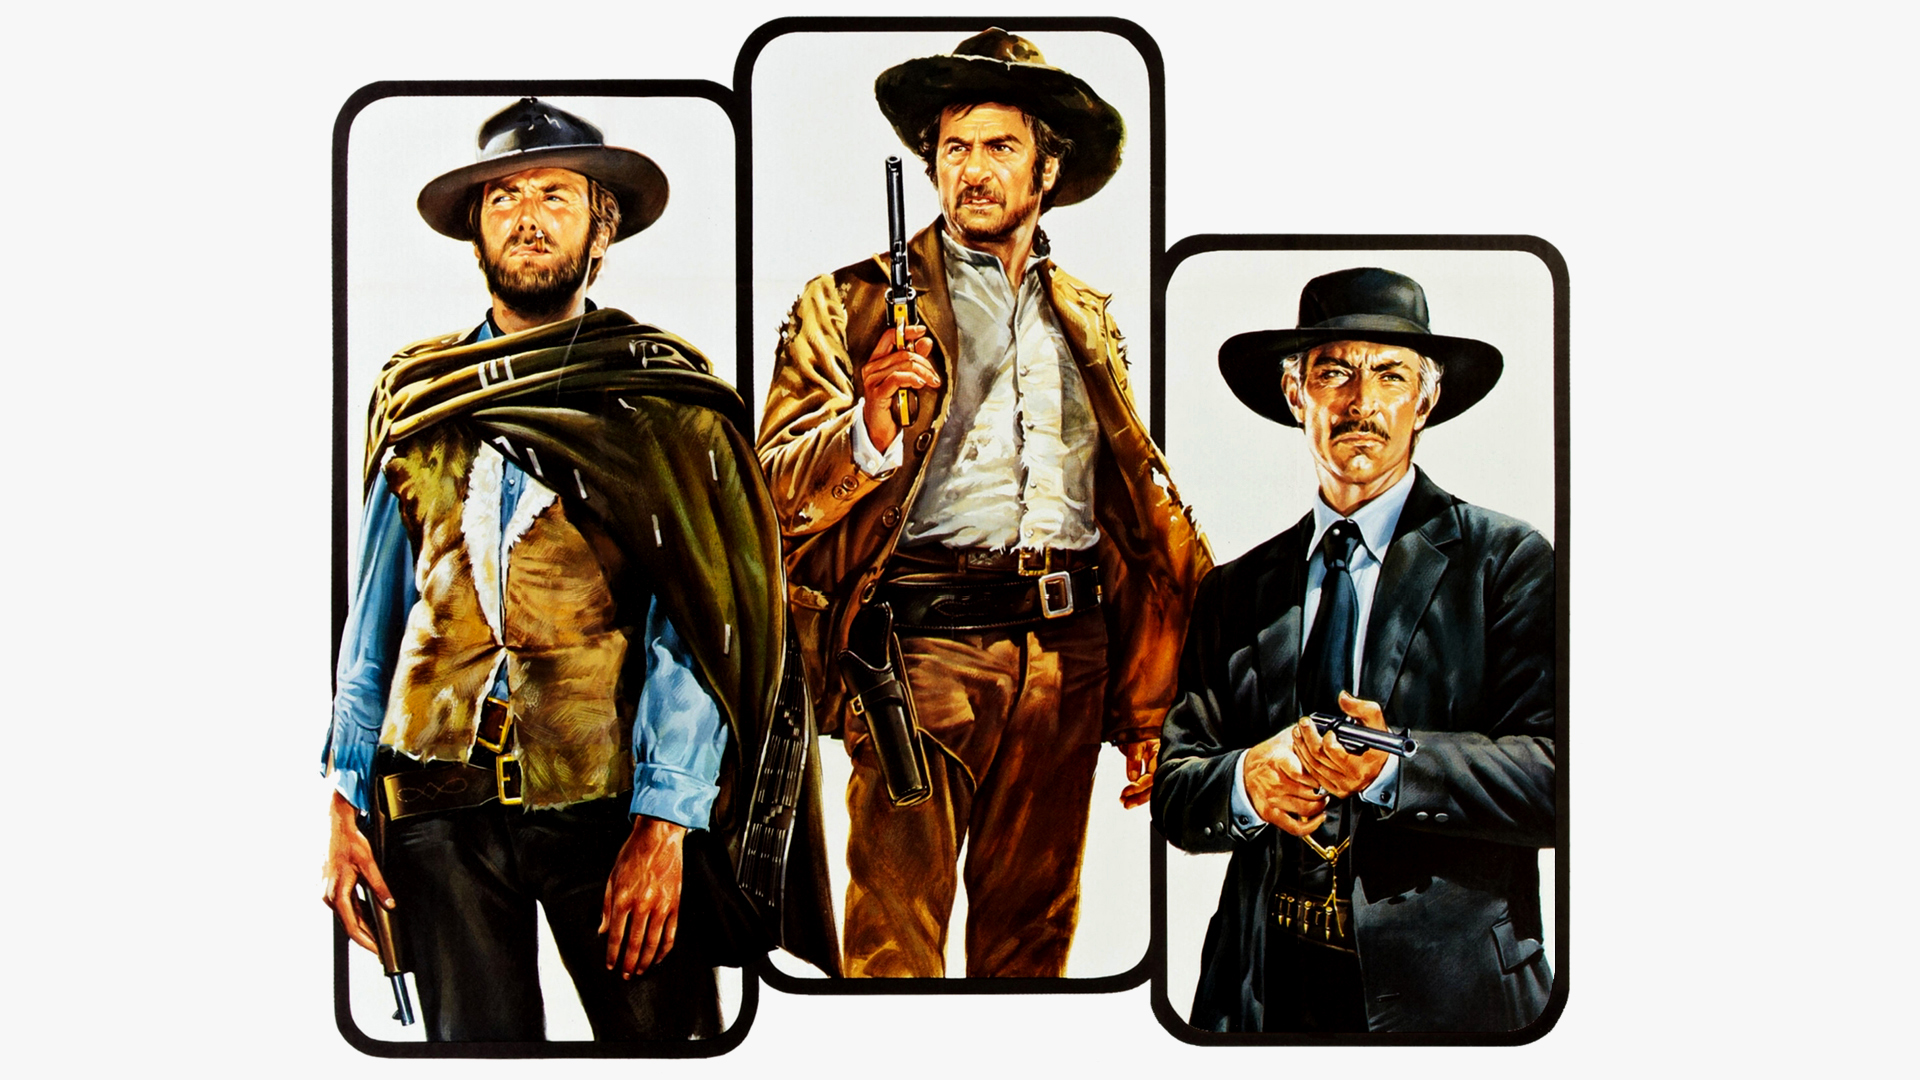 Movie The Good, the Bad and the Ugly HD Wallpaper | Background Image